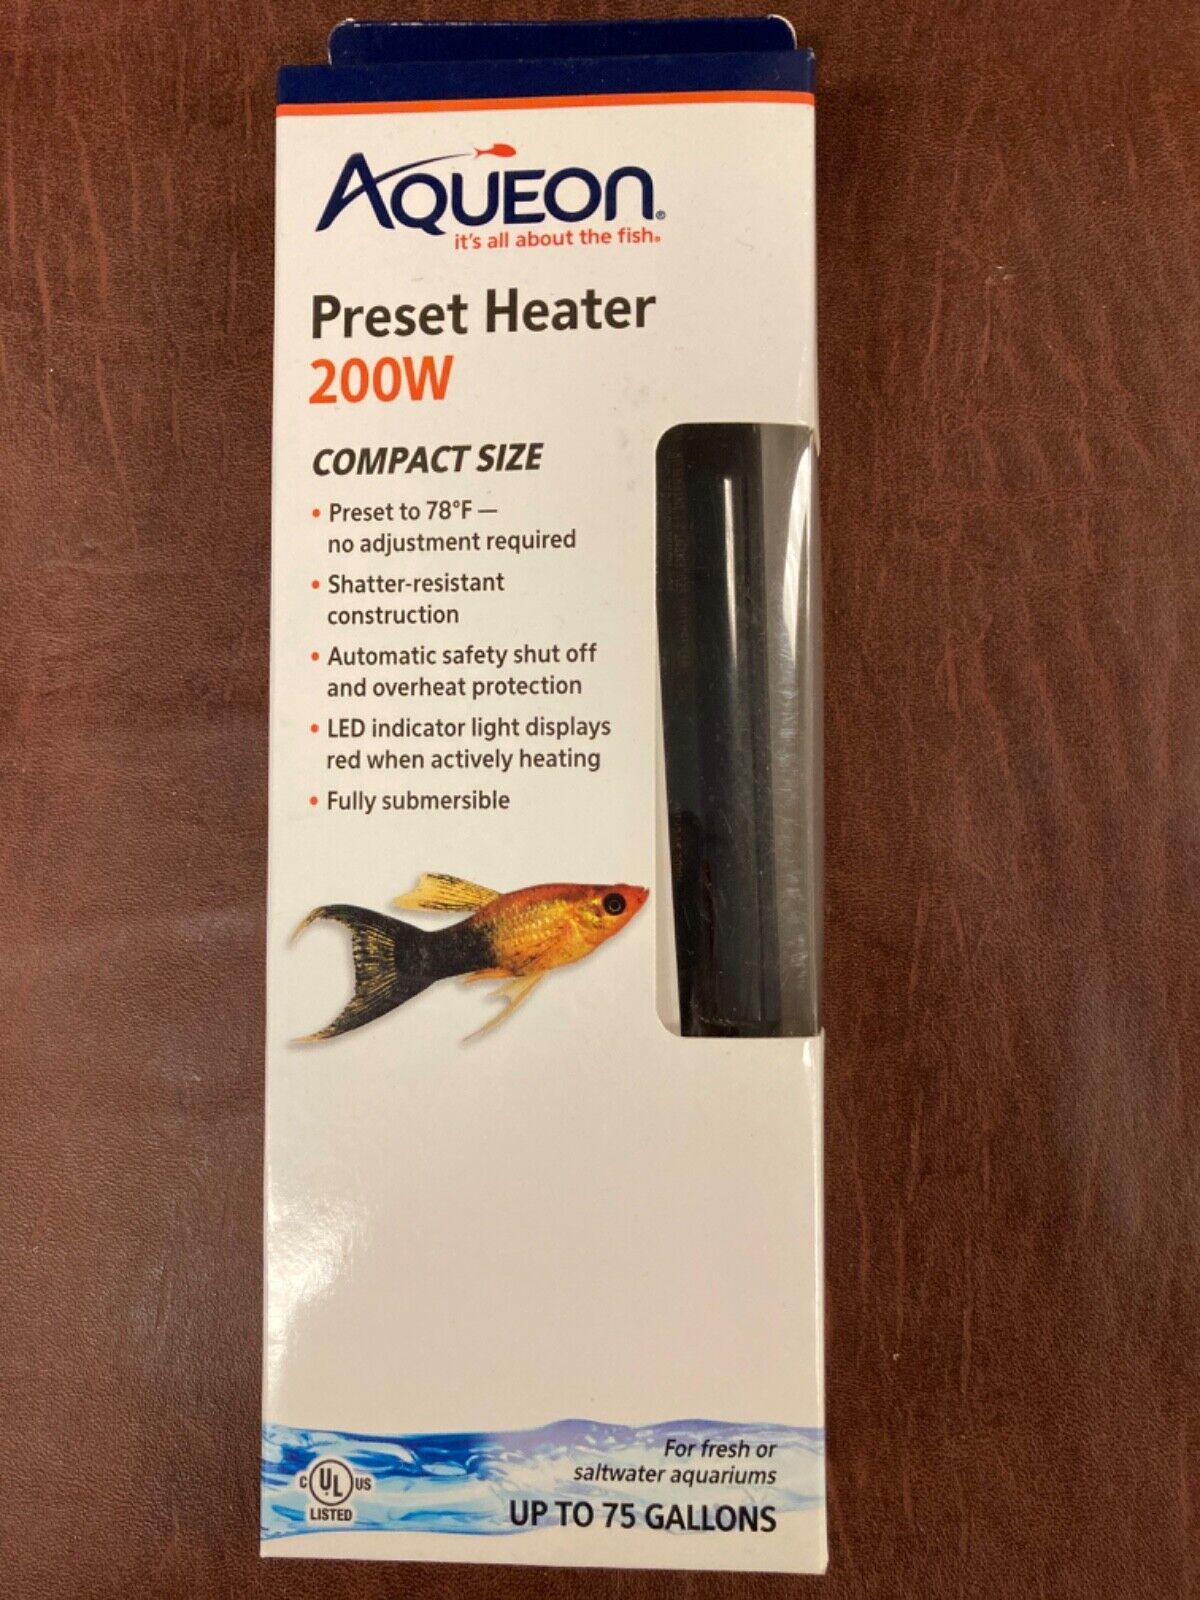 AQUEON PRESET HEATER 200W COMPACT SIZE-UP TO 75 GALLONS-FRESH OR SALTWATER-NEW - $21.48